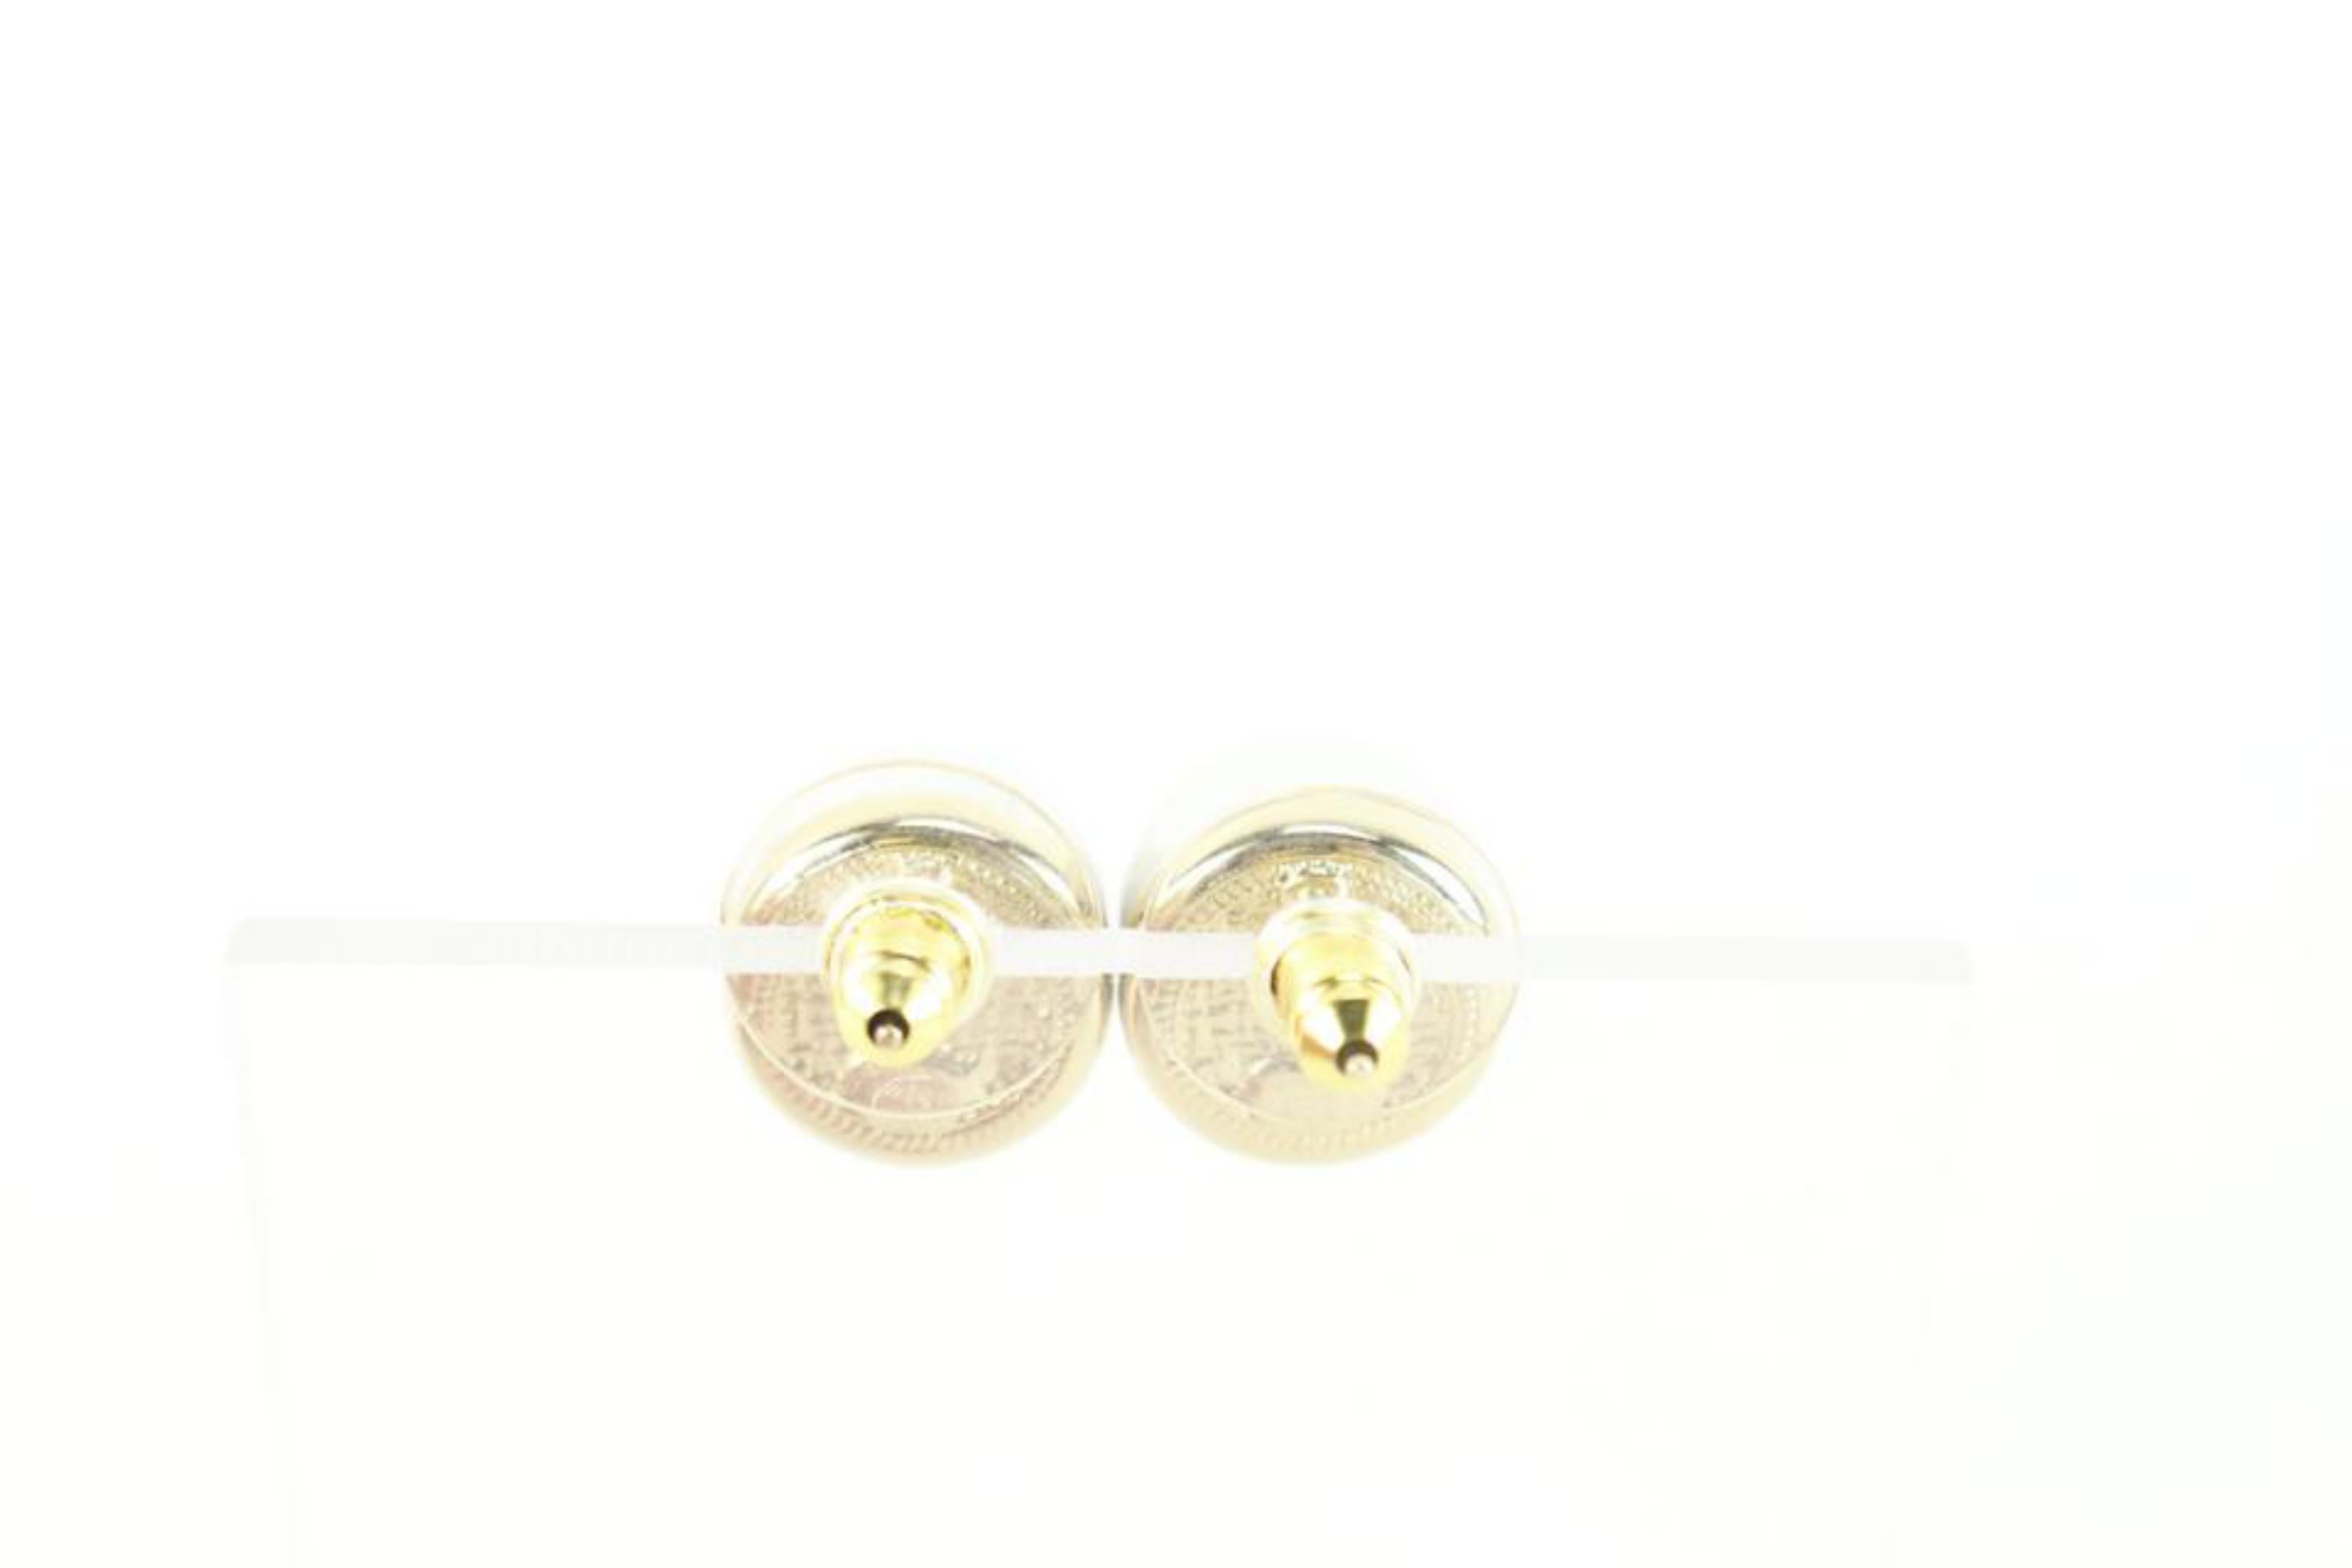 CHANEL Pearl Crystal CC Tweed Drop Earrings Gold Pink Pearly White 1147679